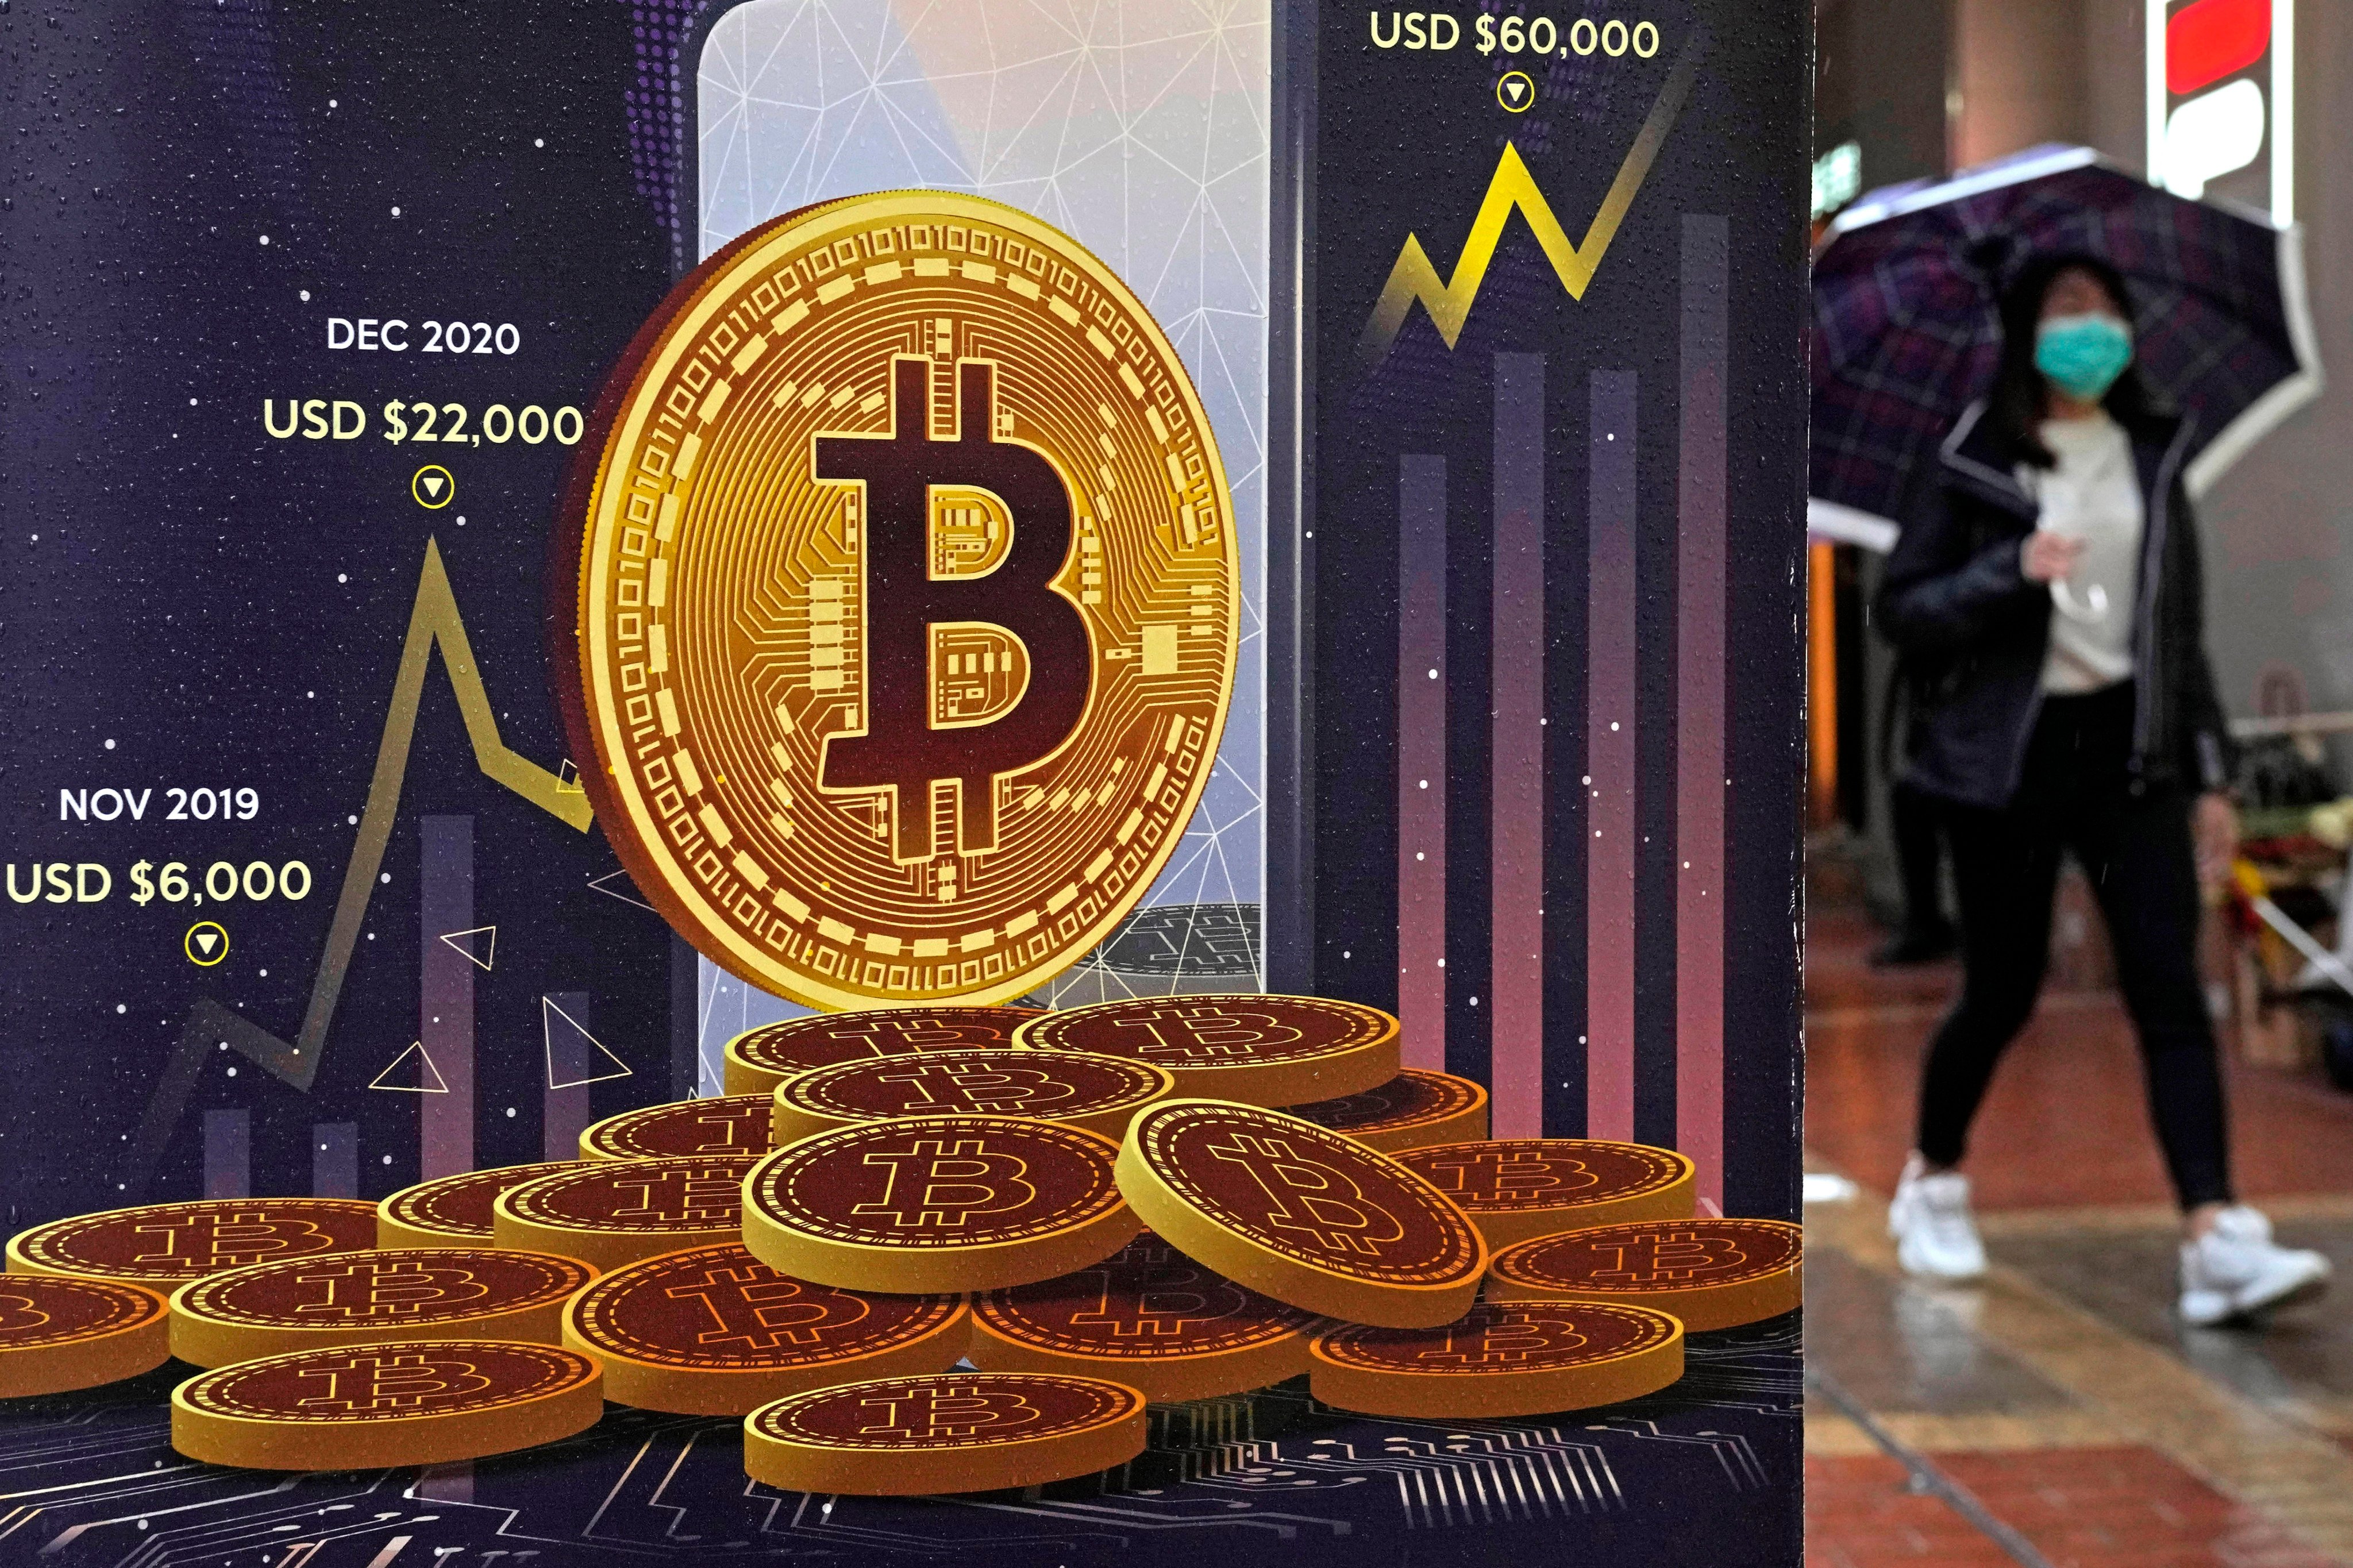 An advertisement for bitcoin is displayed on a street in Hong Kong in February 2022. Cryptocurrencies may have lost their lustre in many parts of the world amid swings in their value, but that has not dampened enthusiasm in Asia and Africa for central bank digital currencies. Photo: AP